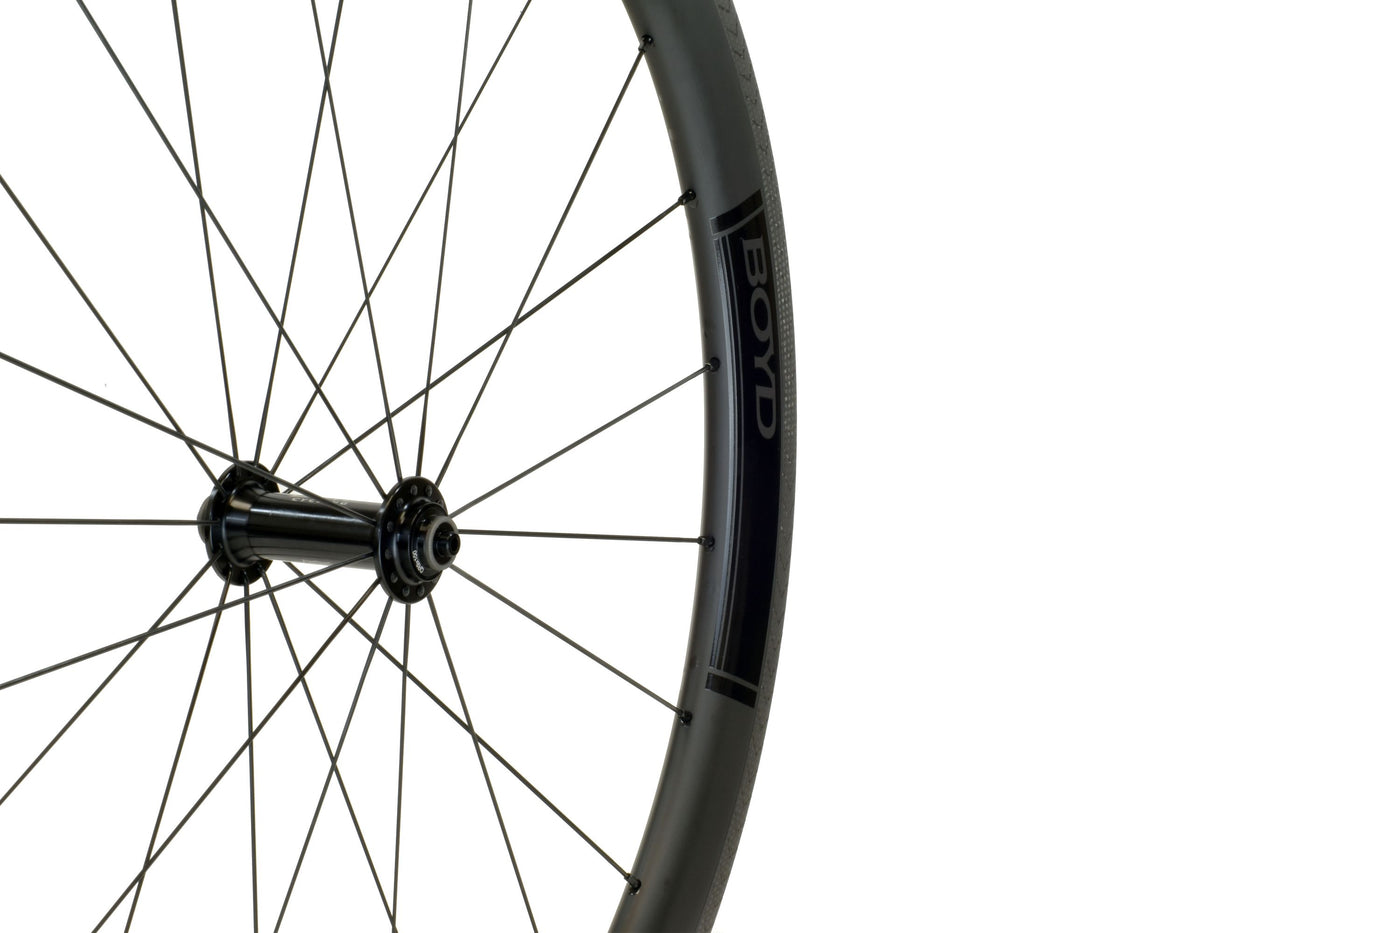 44mm Carbon Clincher Front Wheel